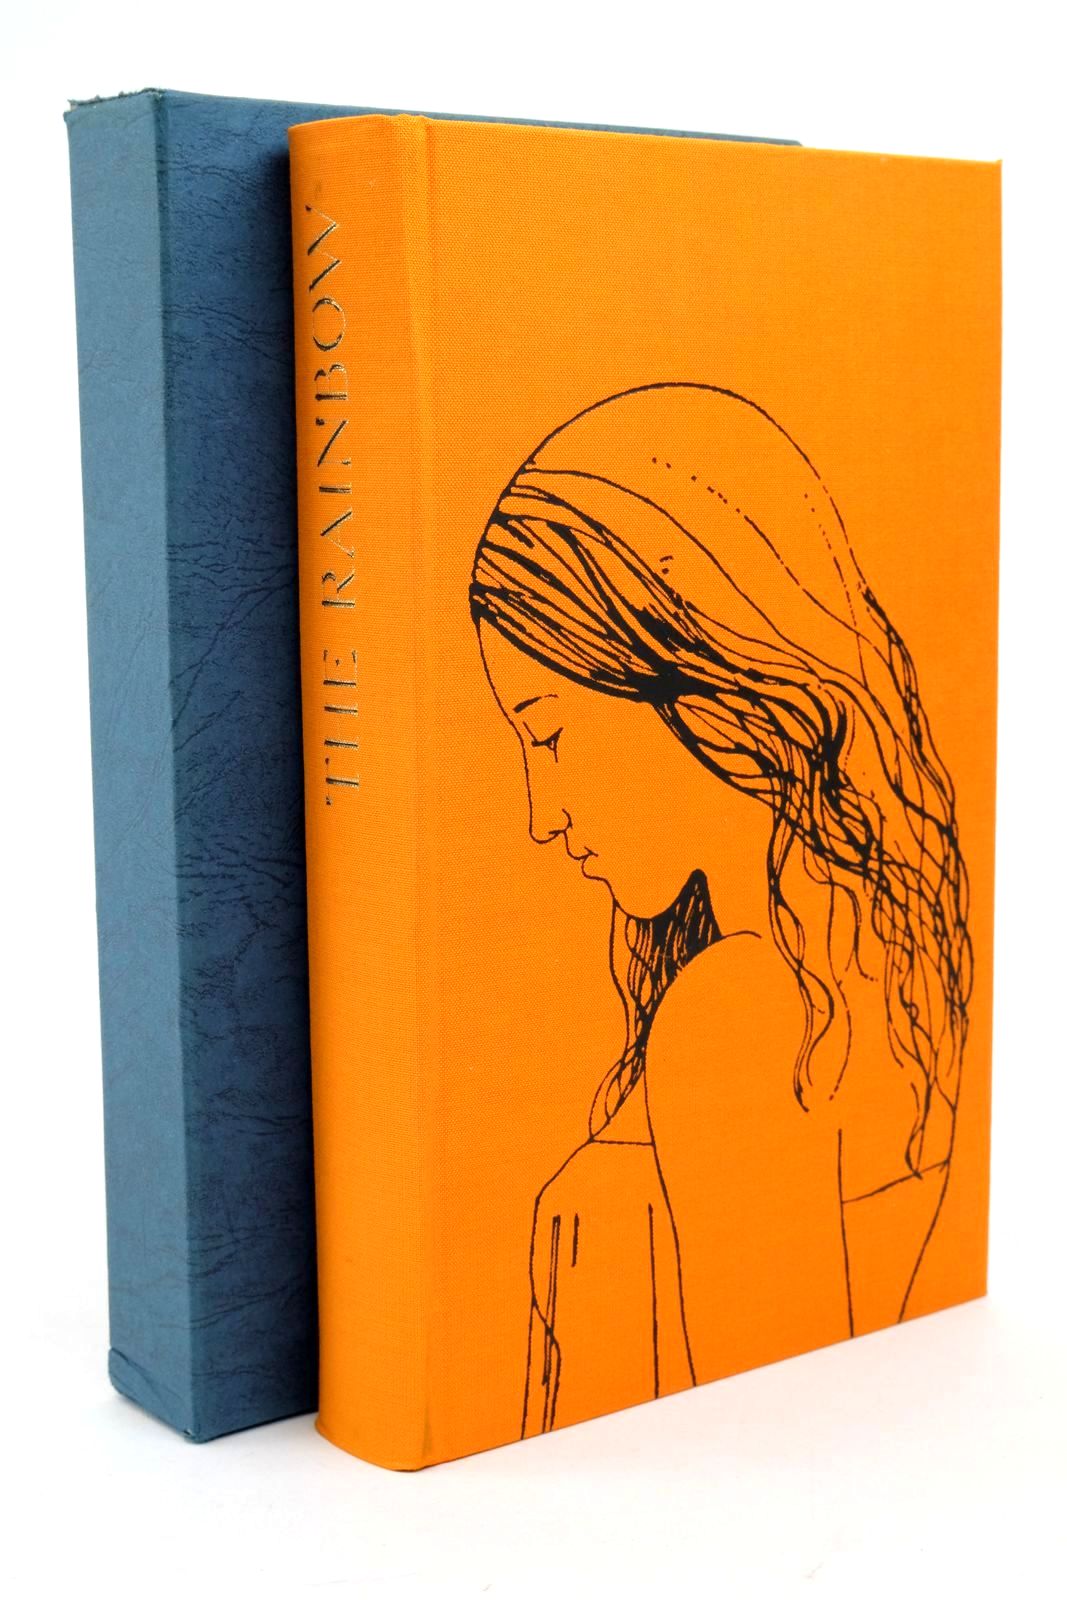 Photo of THE RAINBOW written by Lawrence, D.H. illustrated by Raymond, Charles published by Folio Society (STOCK CODE: 1322879)  for sale by Stella & Rose's Books